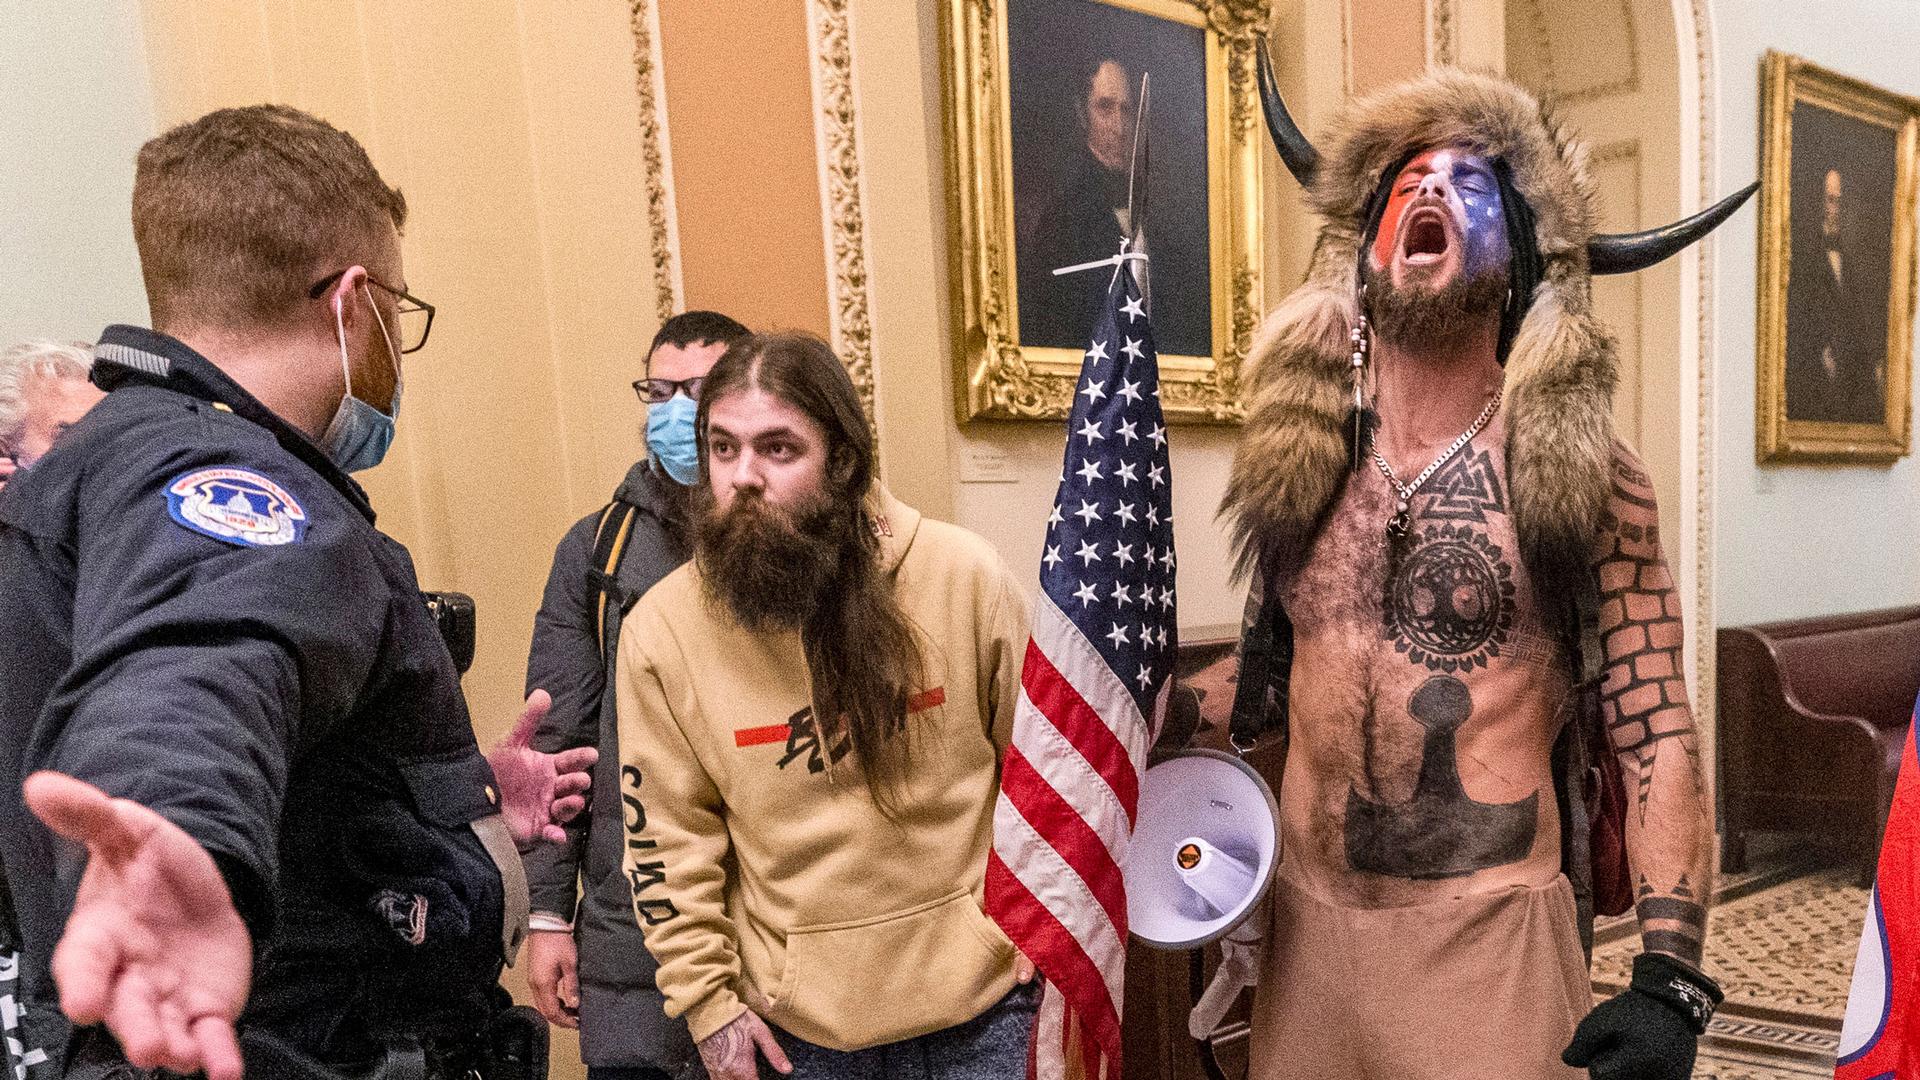 Supporters of President Donald Trump, including Jacob Chansley, right with fur hat, are confronted by US Capitol Police officers outside the Senate Chamber inside the Capitol in Washington. Many of those who stormed the Ca